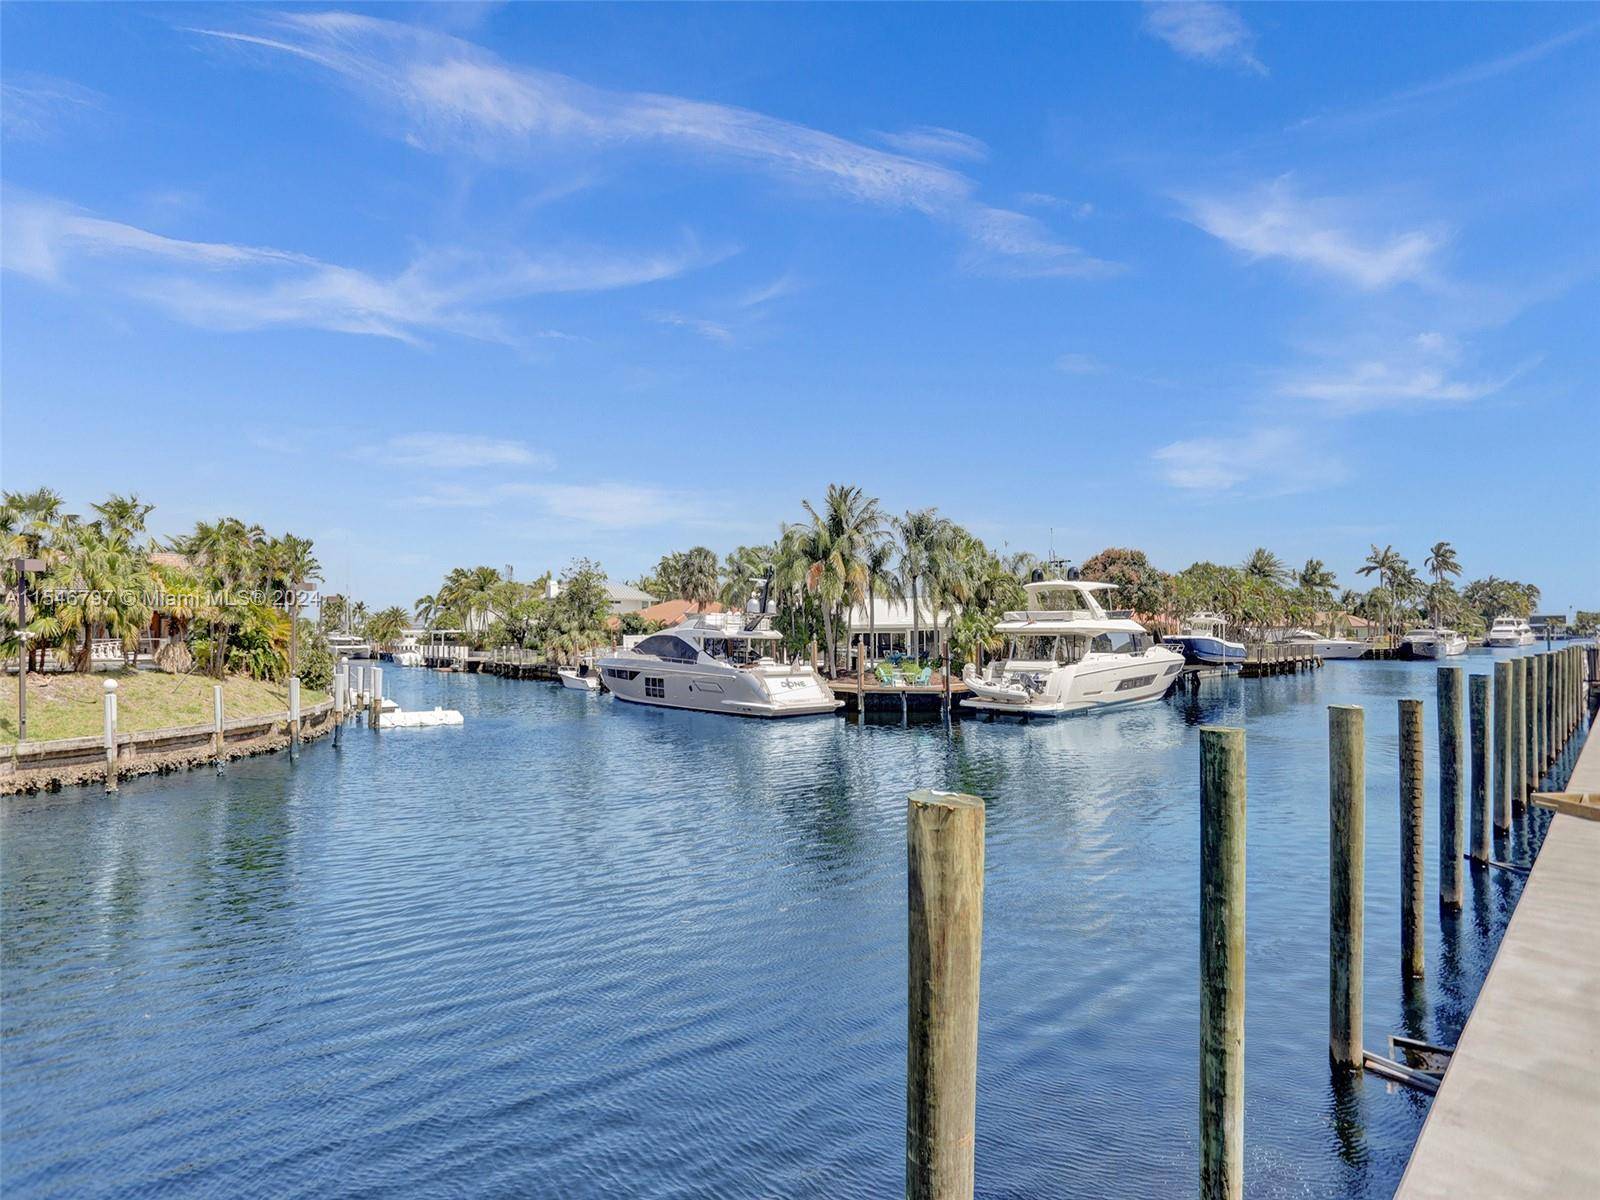 This scenic waterfront property in the coveted Bayview Drive neighborhood of Ft Lauderdale provides a peaceful lifestyle along the water.